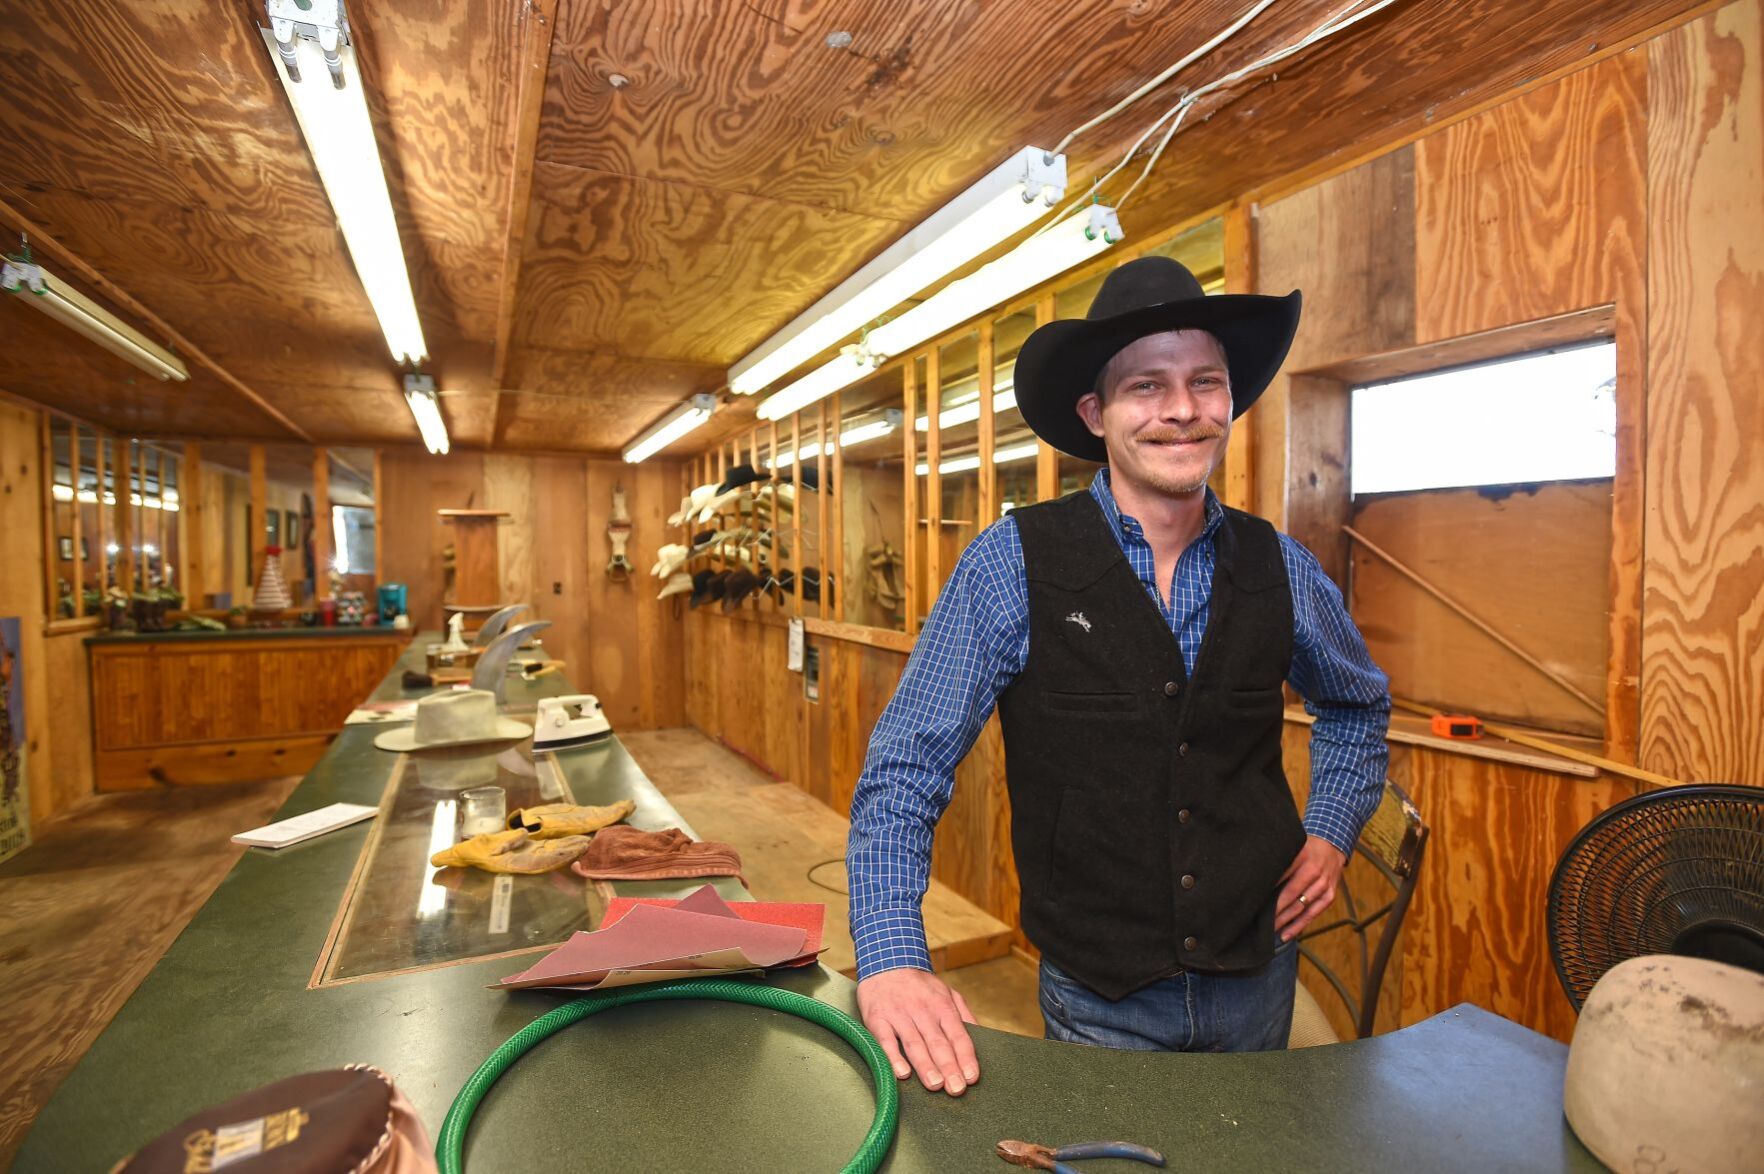 foster's western wear and saddle shop